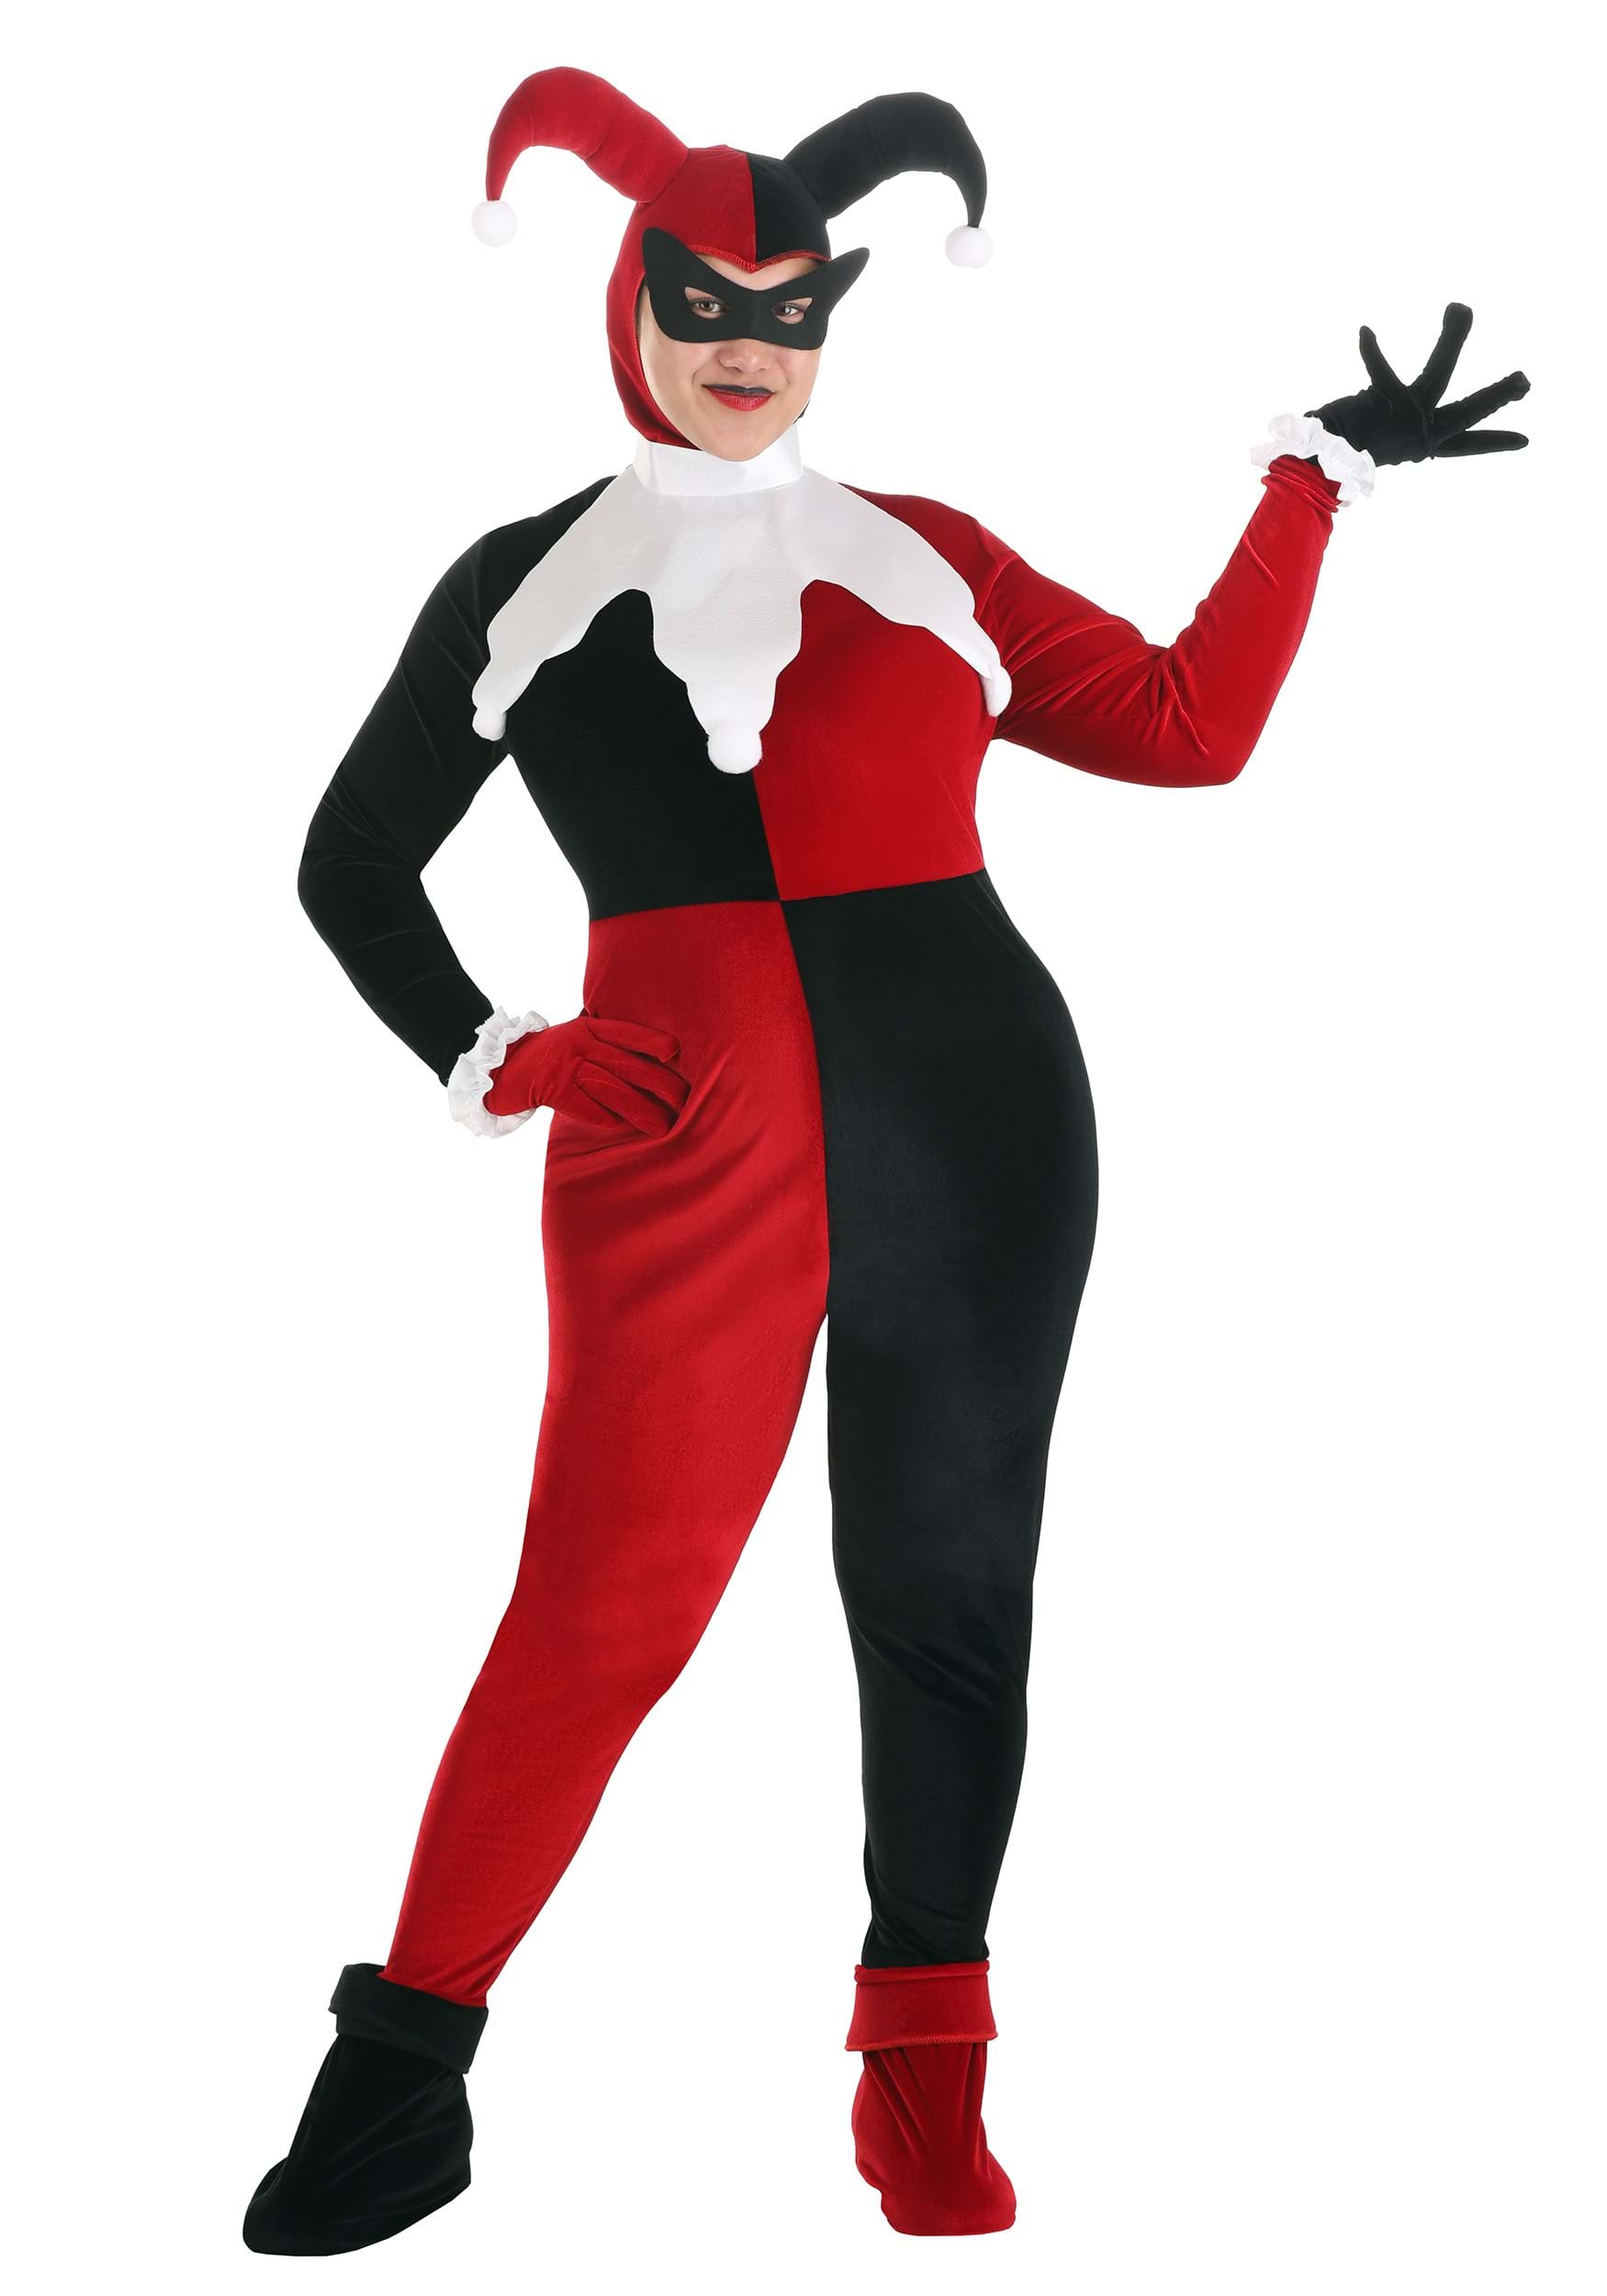 Photos - Fancy Dress Deluxe FUN Costumes  Plus Size Harley Quinn Costume Black/Red FUN1453PL 